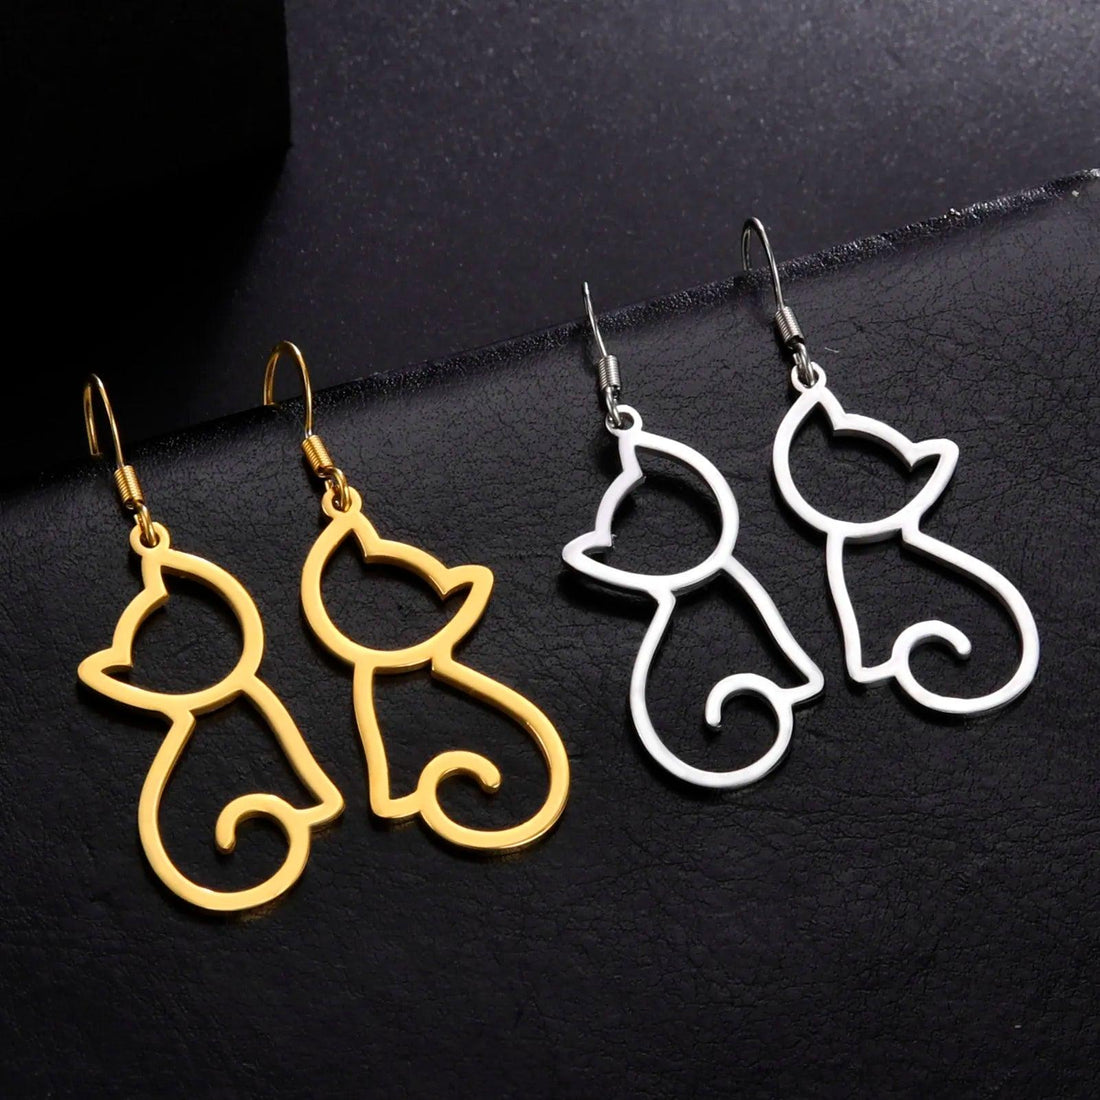 Minimalist Cat Stainless Steel drop Earrings, Silver/Gold - Just Cats - Gifts for Cat Lovers